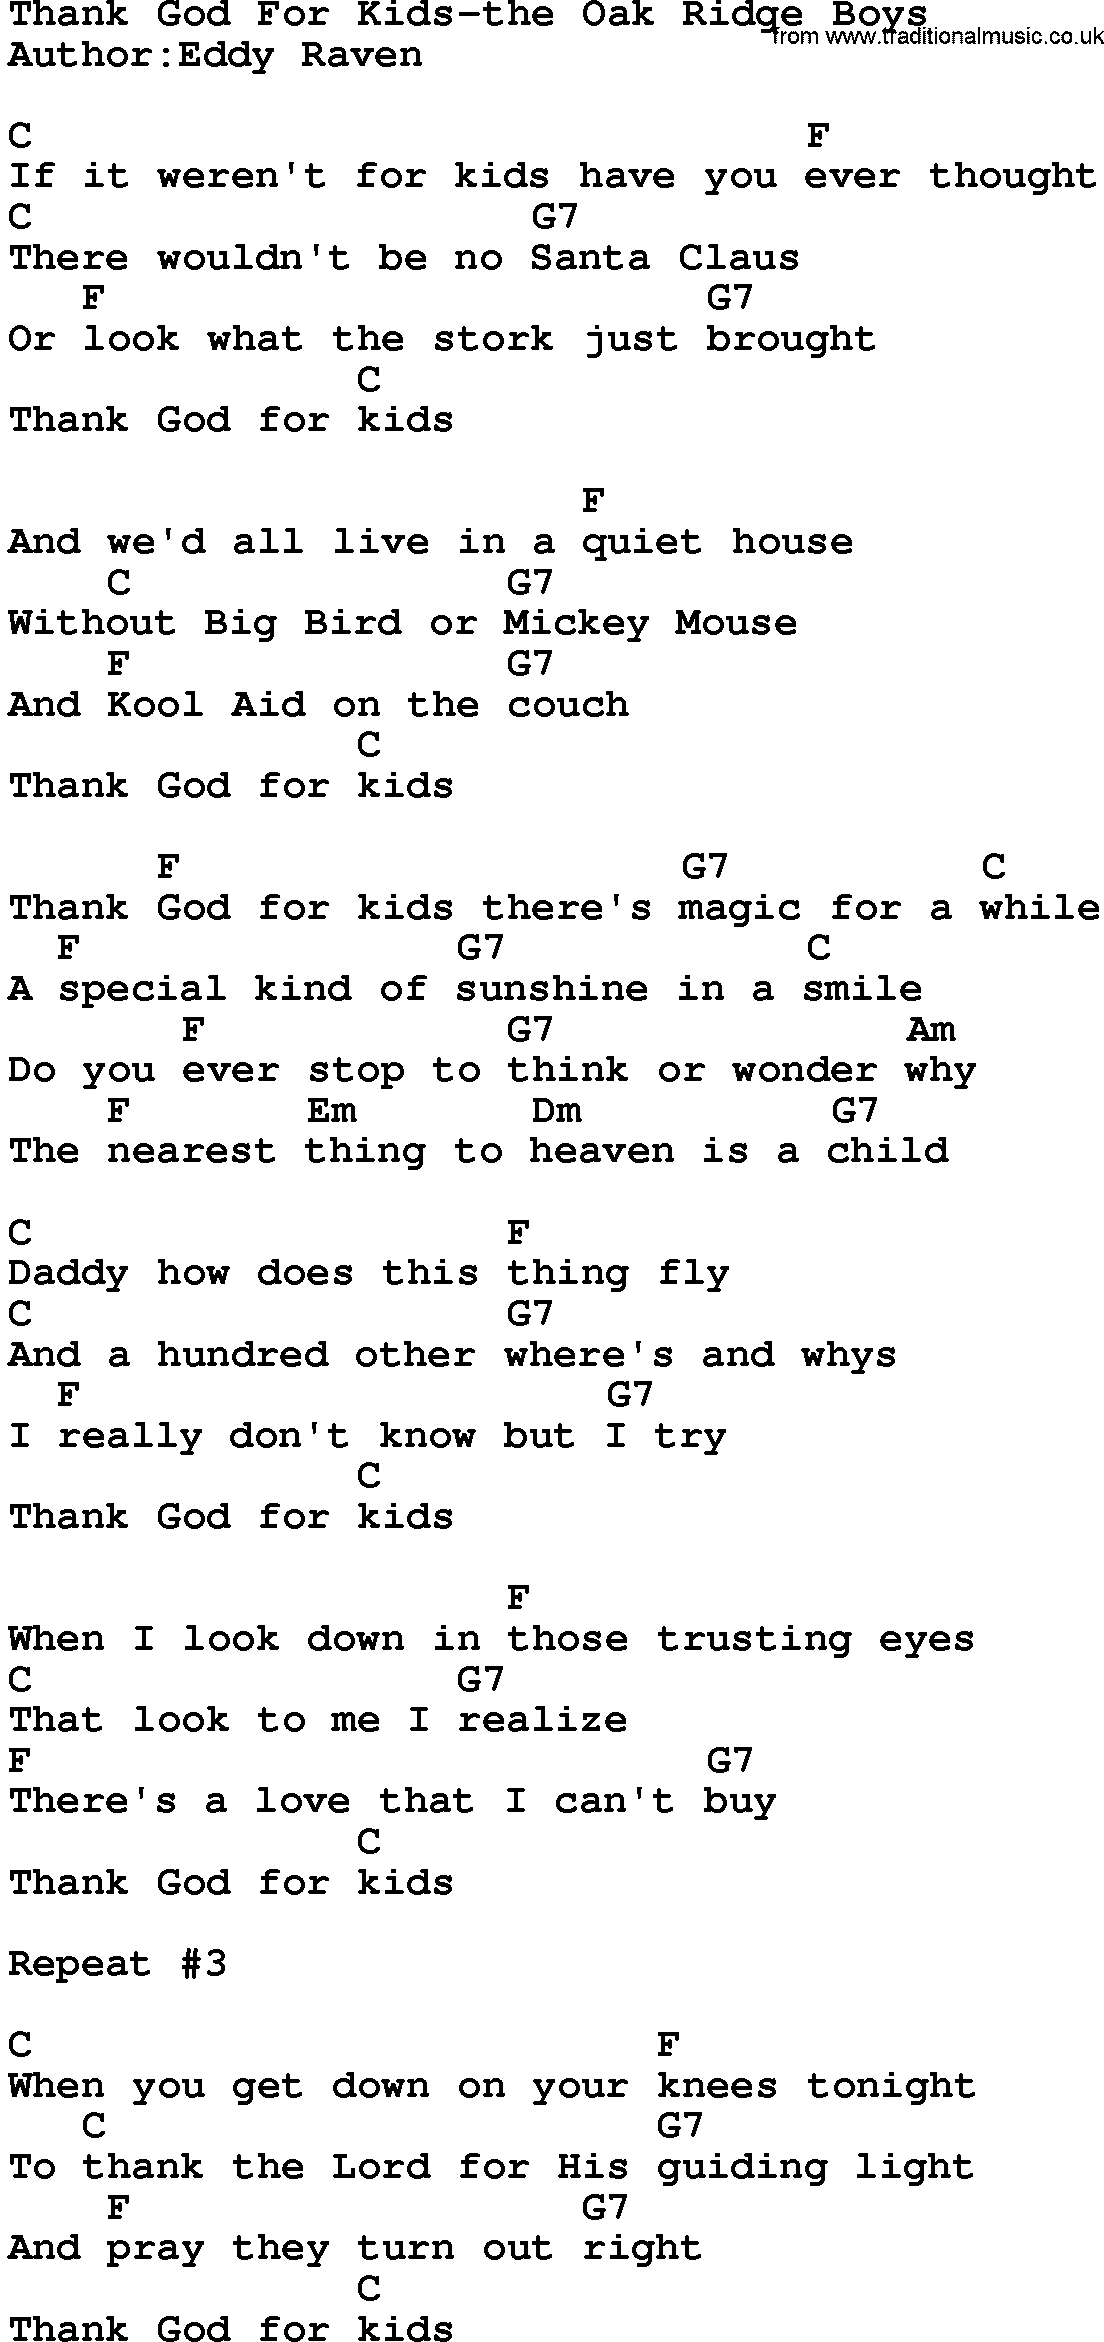 Country music song: Thank God For Kids-The Oak Ridge Boys lyrics and chords